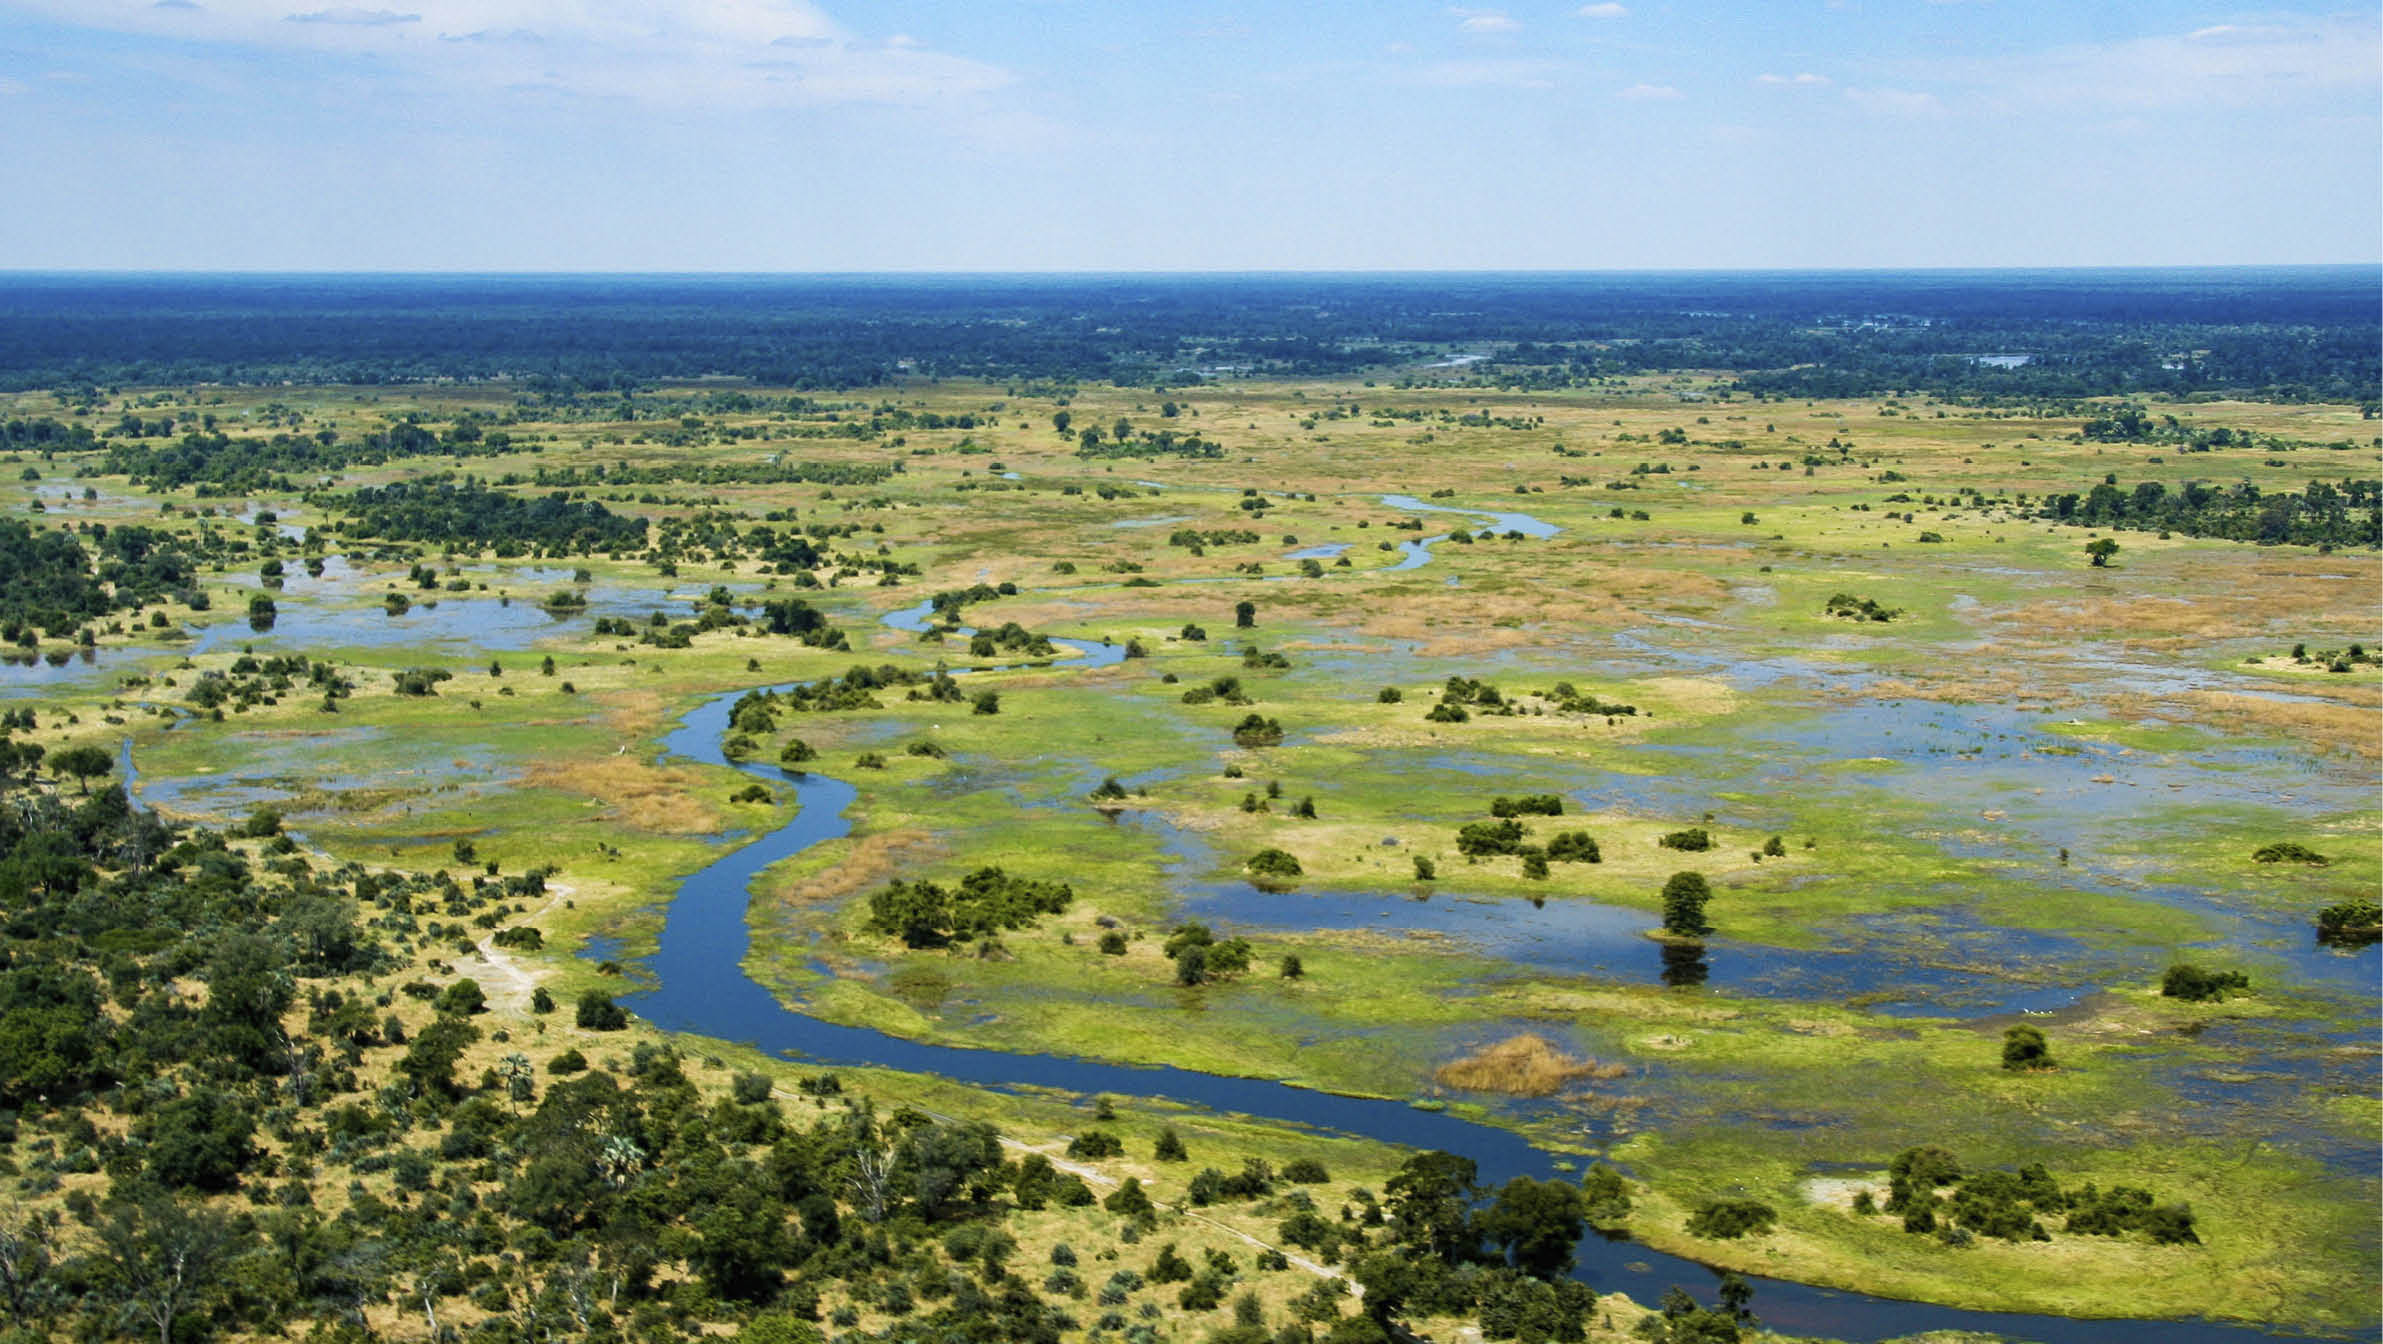 The Okavango Delta in Botswana is a very large, swampy inland delta formed where the Okavango River reaches a tectonic trough in the central part of the endorheic basin of the Kalahari.